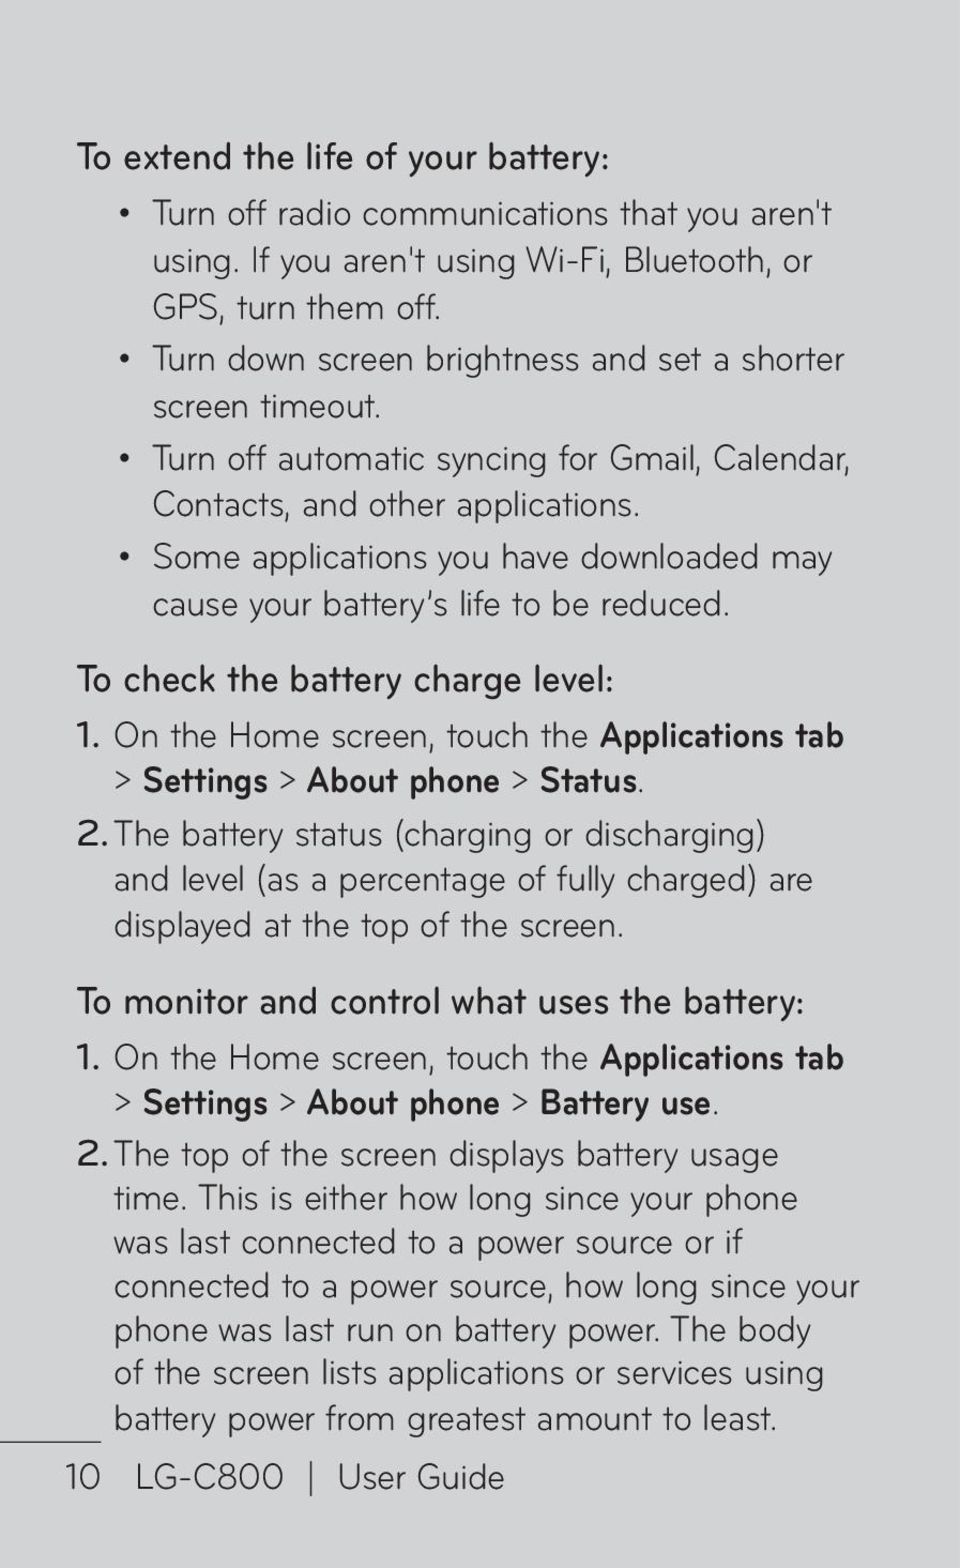 Some applications you have downloaded may cause your battery s life to be reduced. To check the battery charge level: 1.